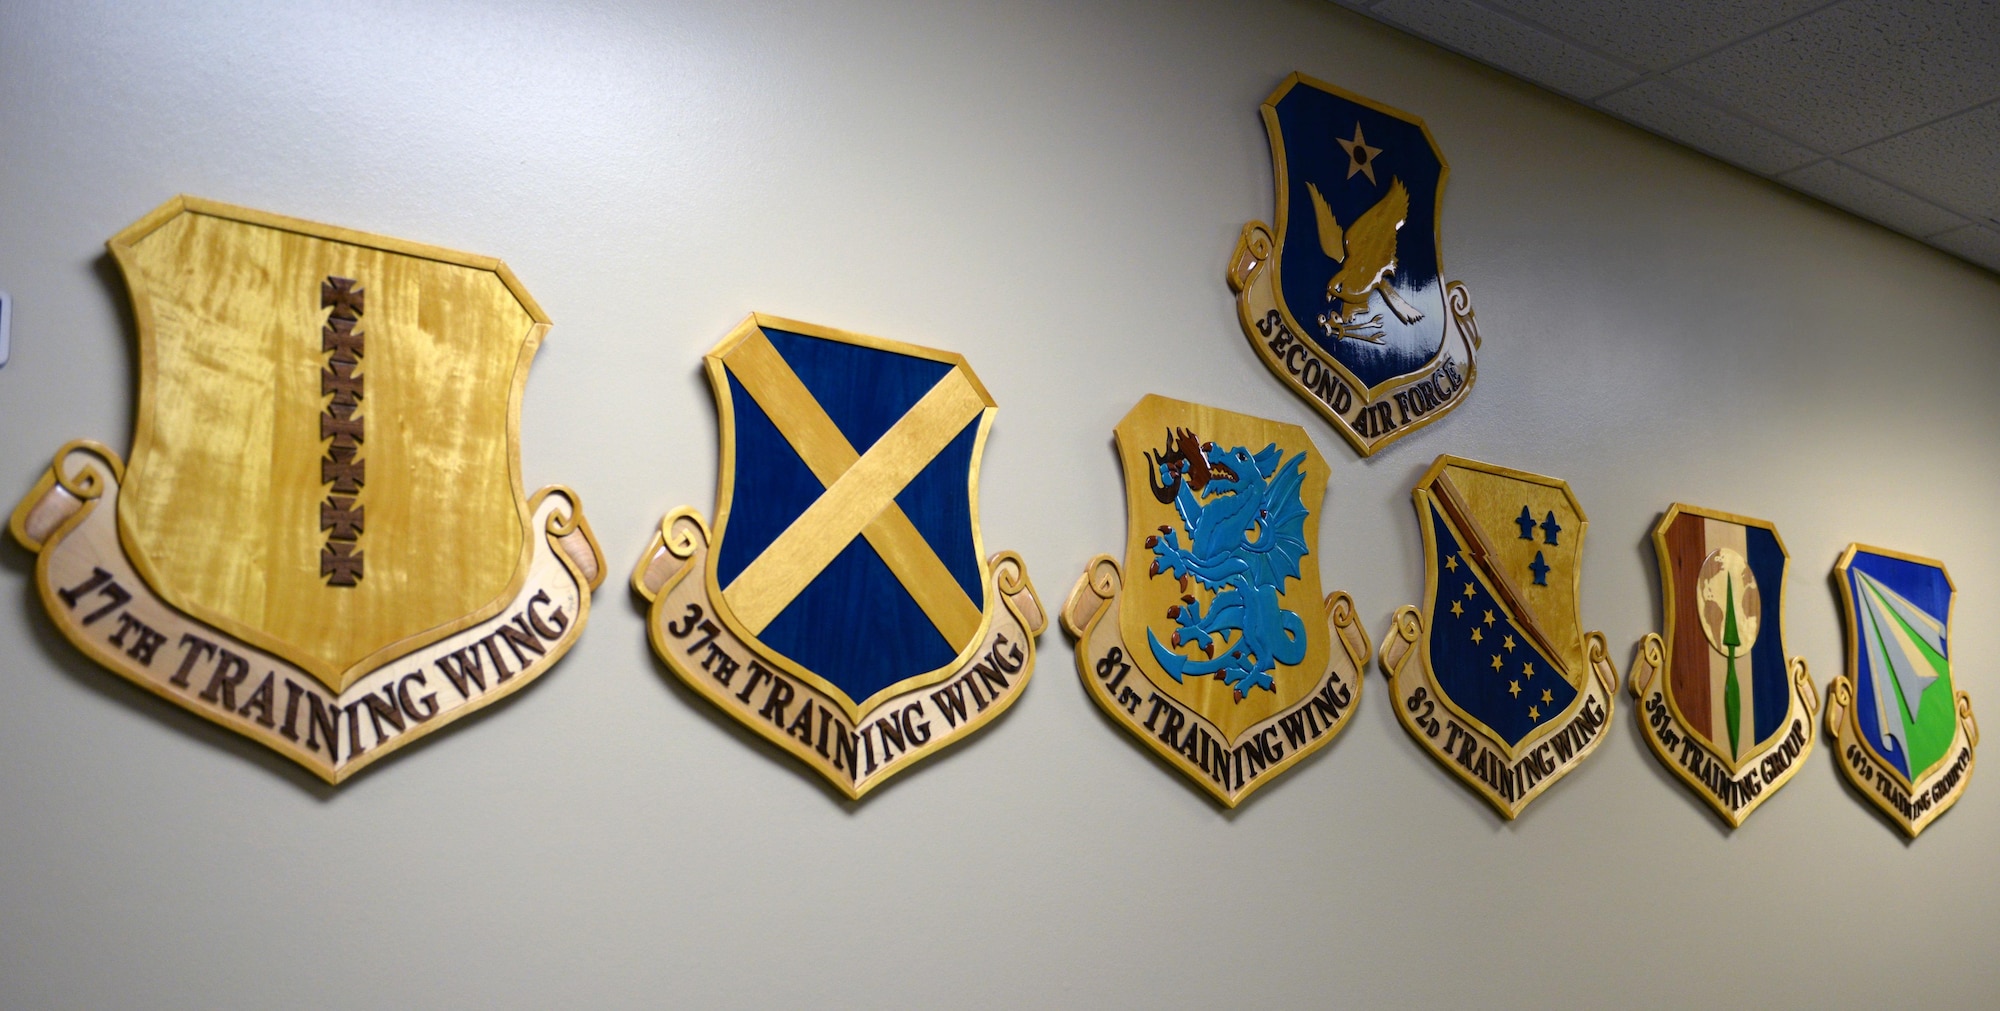 Wing shields hang on the wall at the 81st Training Support Squadron Military Training Leader School’s new location in Lott Hall, July 17, 2017, on Keesler Air Force Base, Miss. The course recently moved locations from Allee Hall to Lott Hall, and now features its own dedicated classroom, CPR training room, conference room and instructor offices, as well as additional resources and career field heritage pieces. (U.S. Air Force photo by 2nd Lt. Toney Doan)